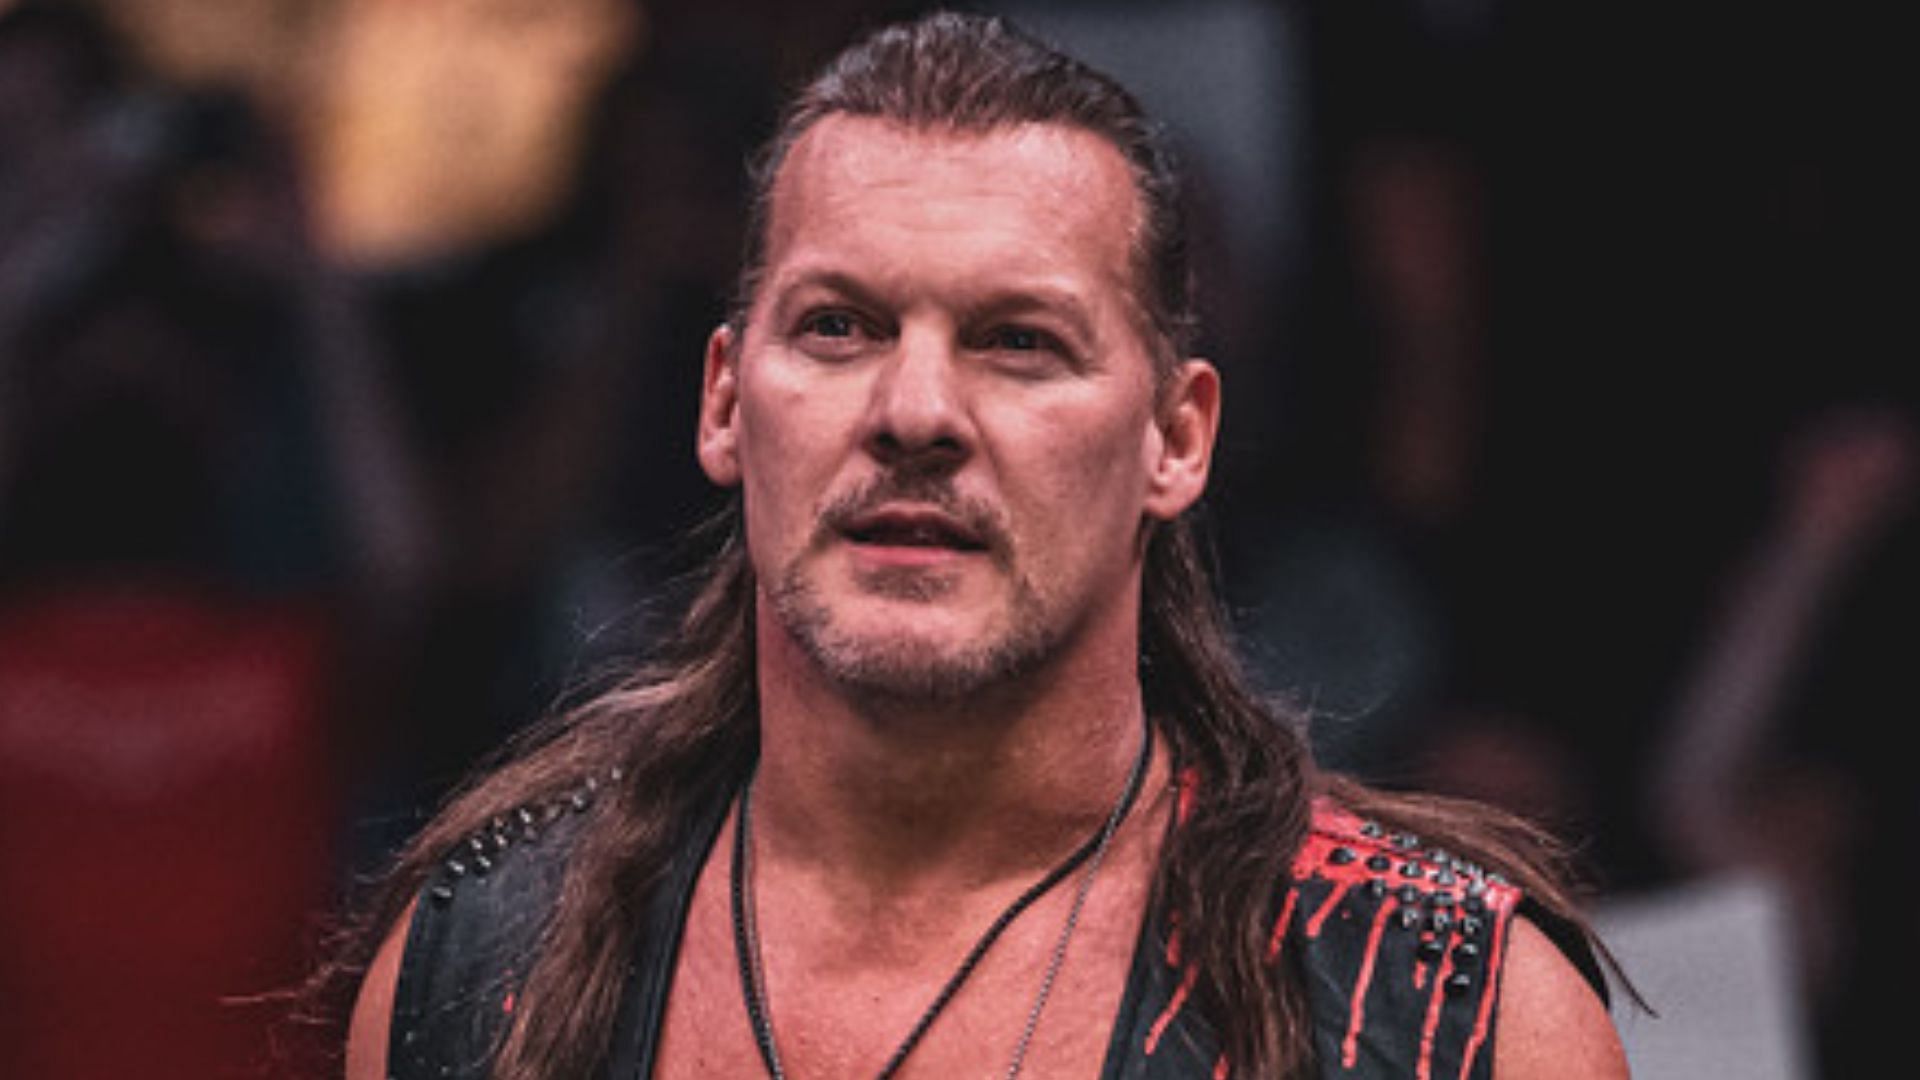 Chris Jericho wants to face a number of top stars